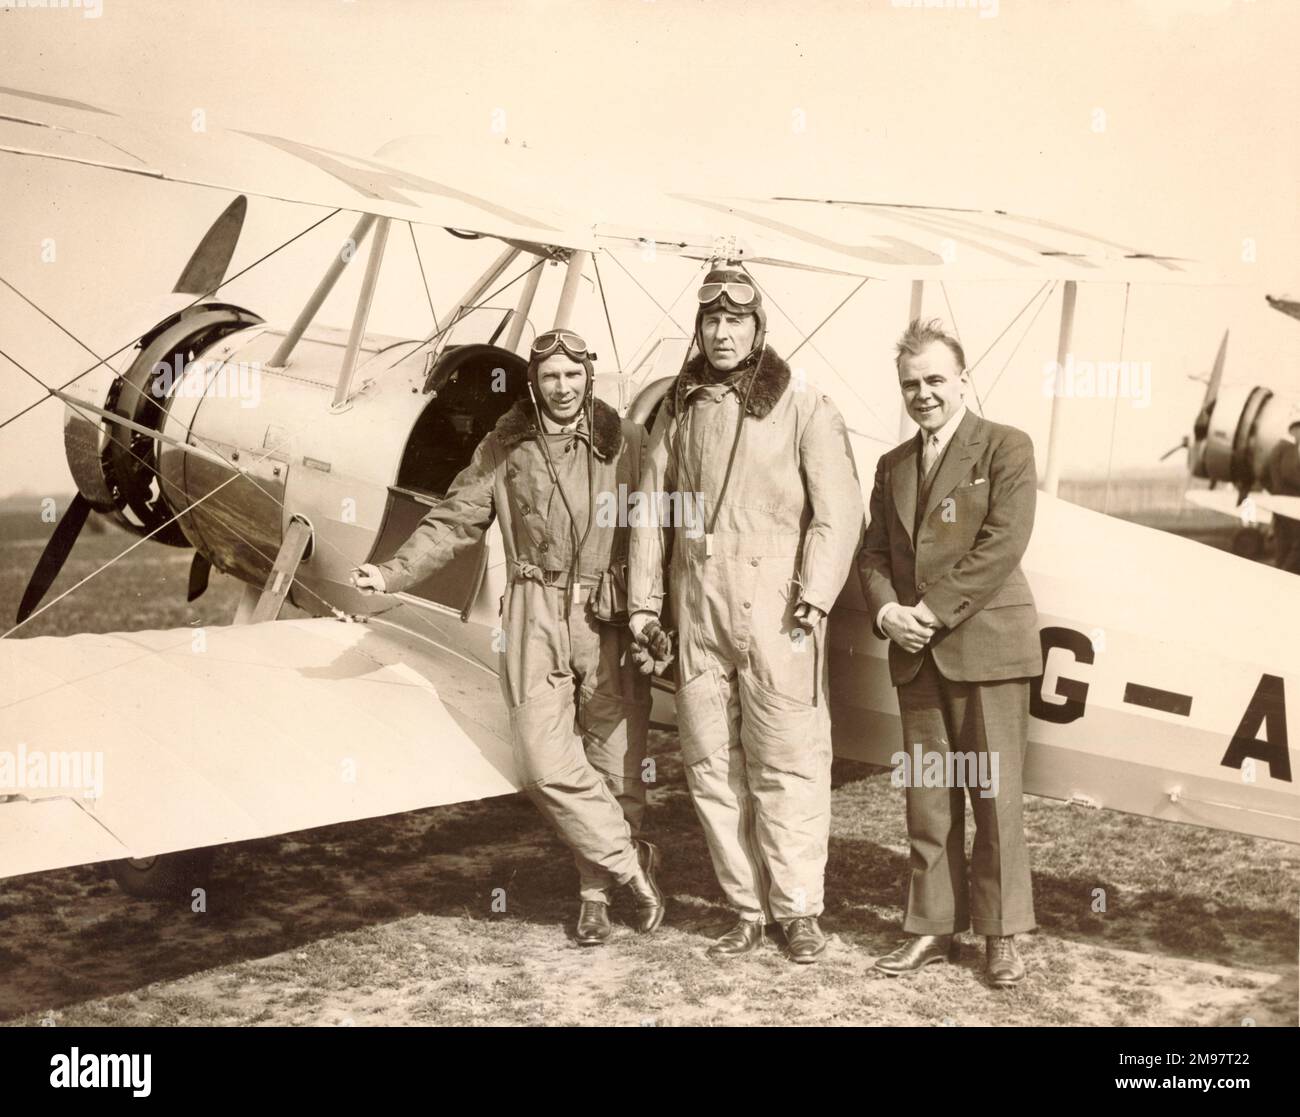 Lord Londonderry, then Secretary of State for Air, centre, takes delivery of his first aircraft at Heston Aerodrome, an Avro Club Cadet painted in Londonderry colours. Left is Capt Baker, Chief Instructor at Heston and B.S. Allen, right. March 1934. Stock Photo